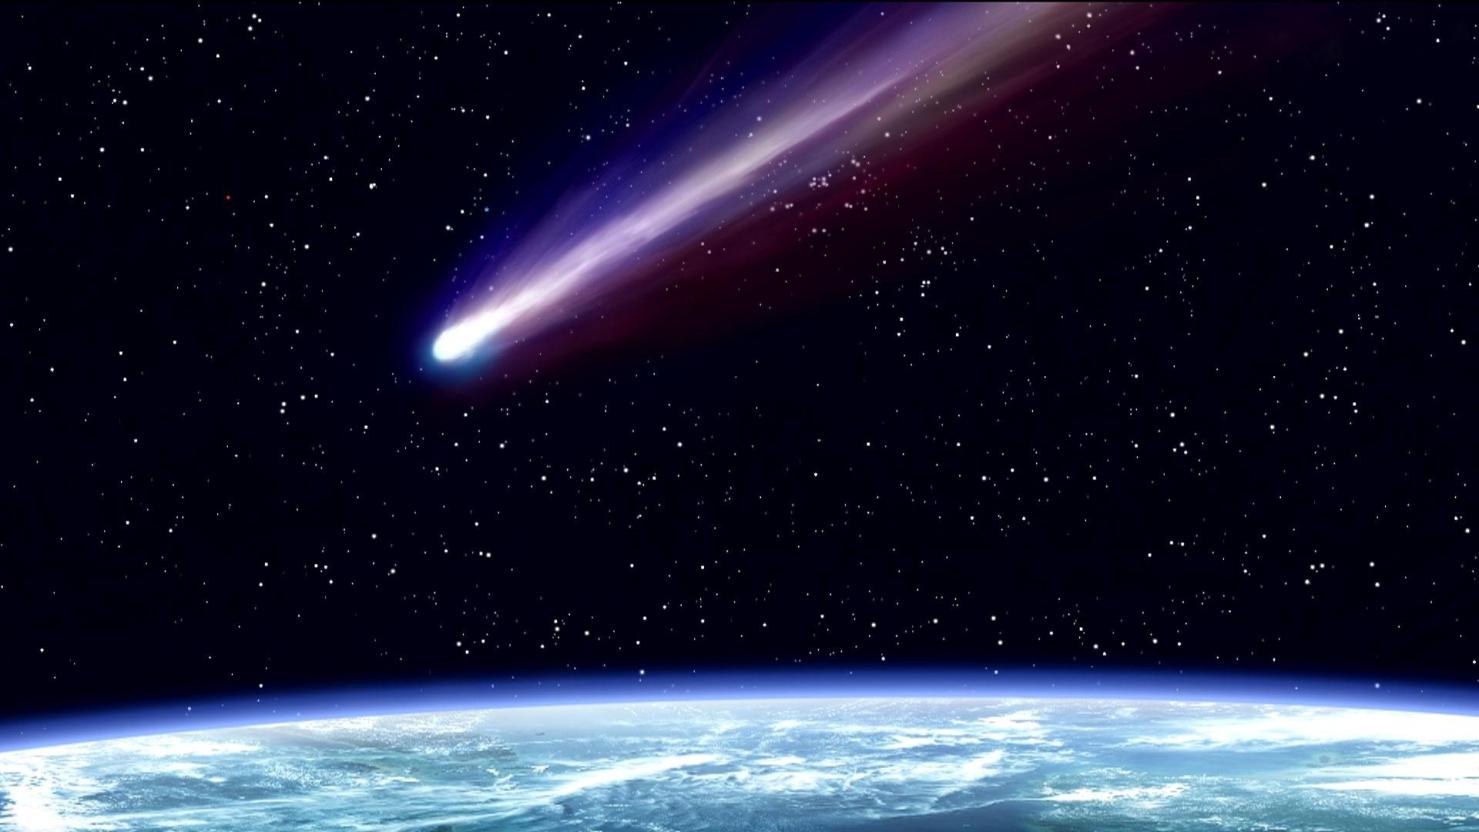 Where Do Comets Come From?